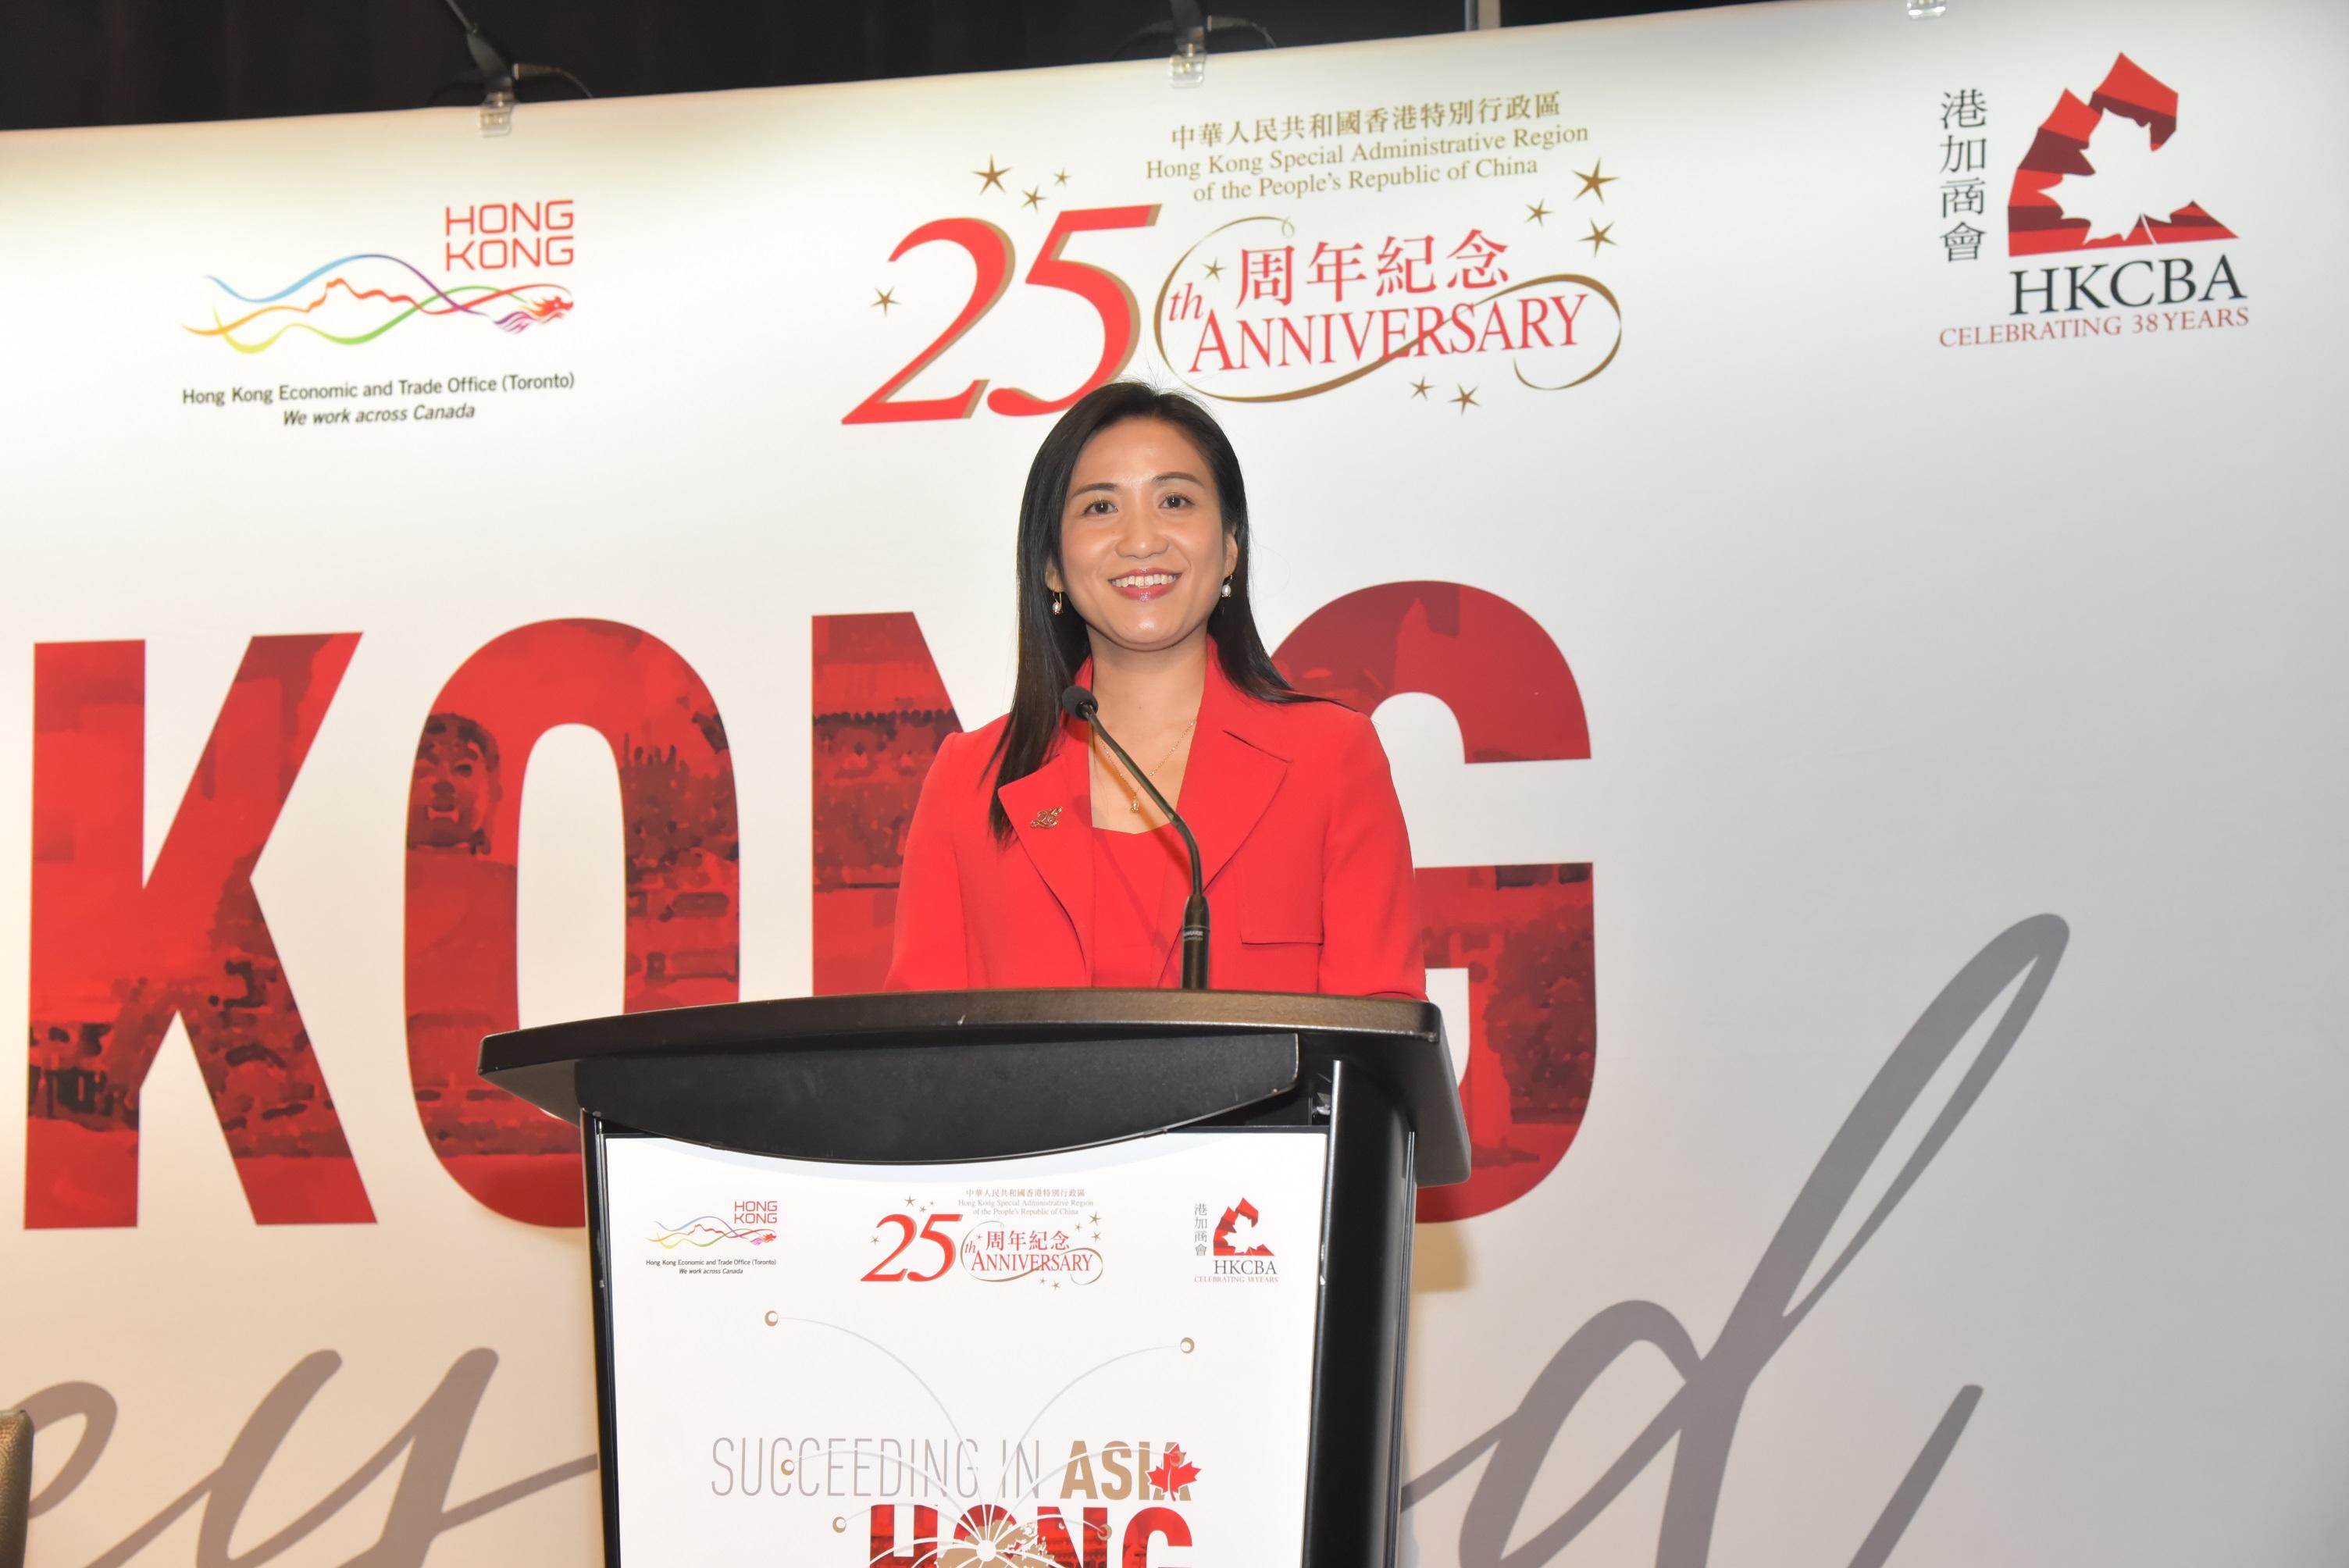 The Director of the Hong Kong Economic and Trade Office (Toronto) (Toronto ETO), Ms Emily Mo, delivers opening remarks at a business conference in Toronto on September 23 (Toronto time) on the theme "A New Era: Succeeding in Asia and Beyond through Hong Kong". The conference was co-hosted by Toronto ETO with the Hong Kong-Canada Business Association in celebration of the 25th anniversary of the establishment of the Hong Kong Special Administrative Region.